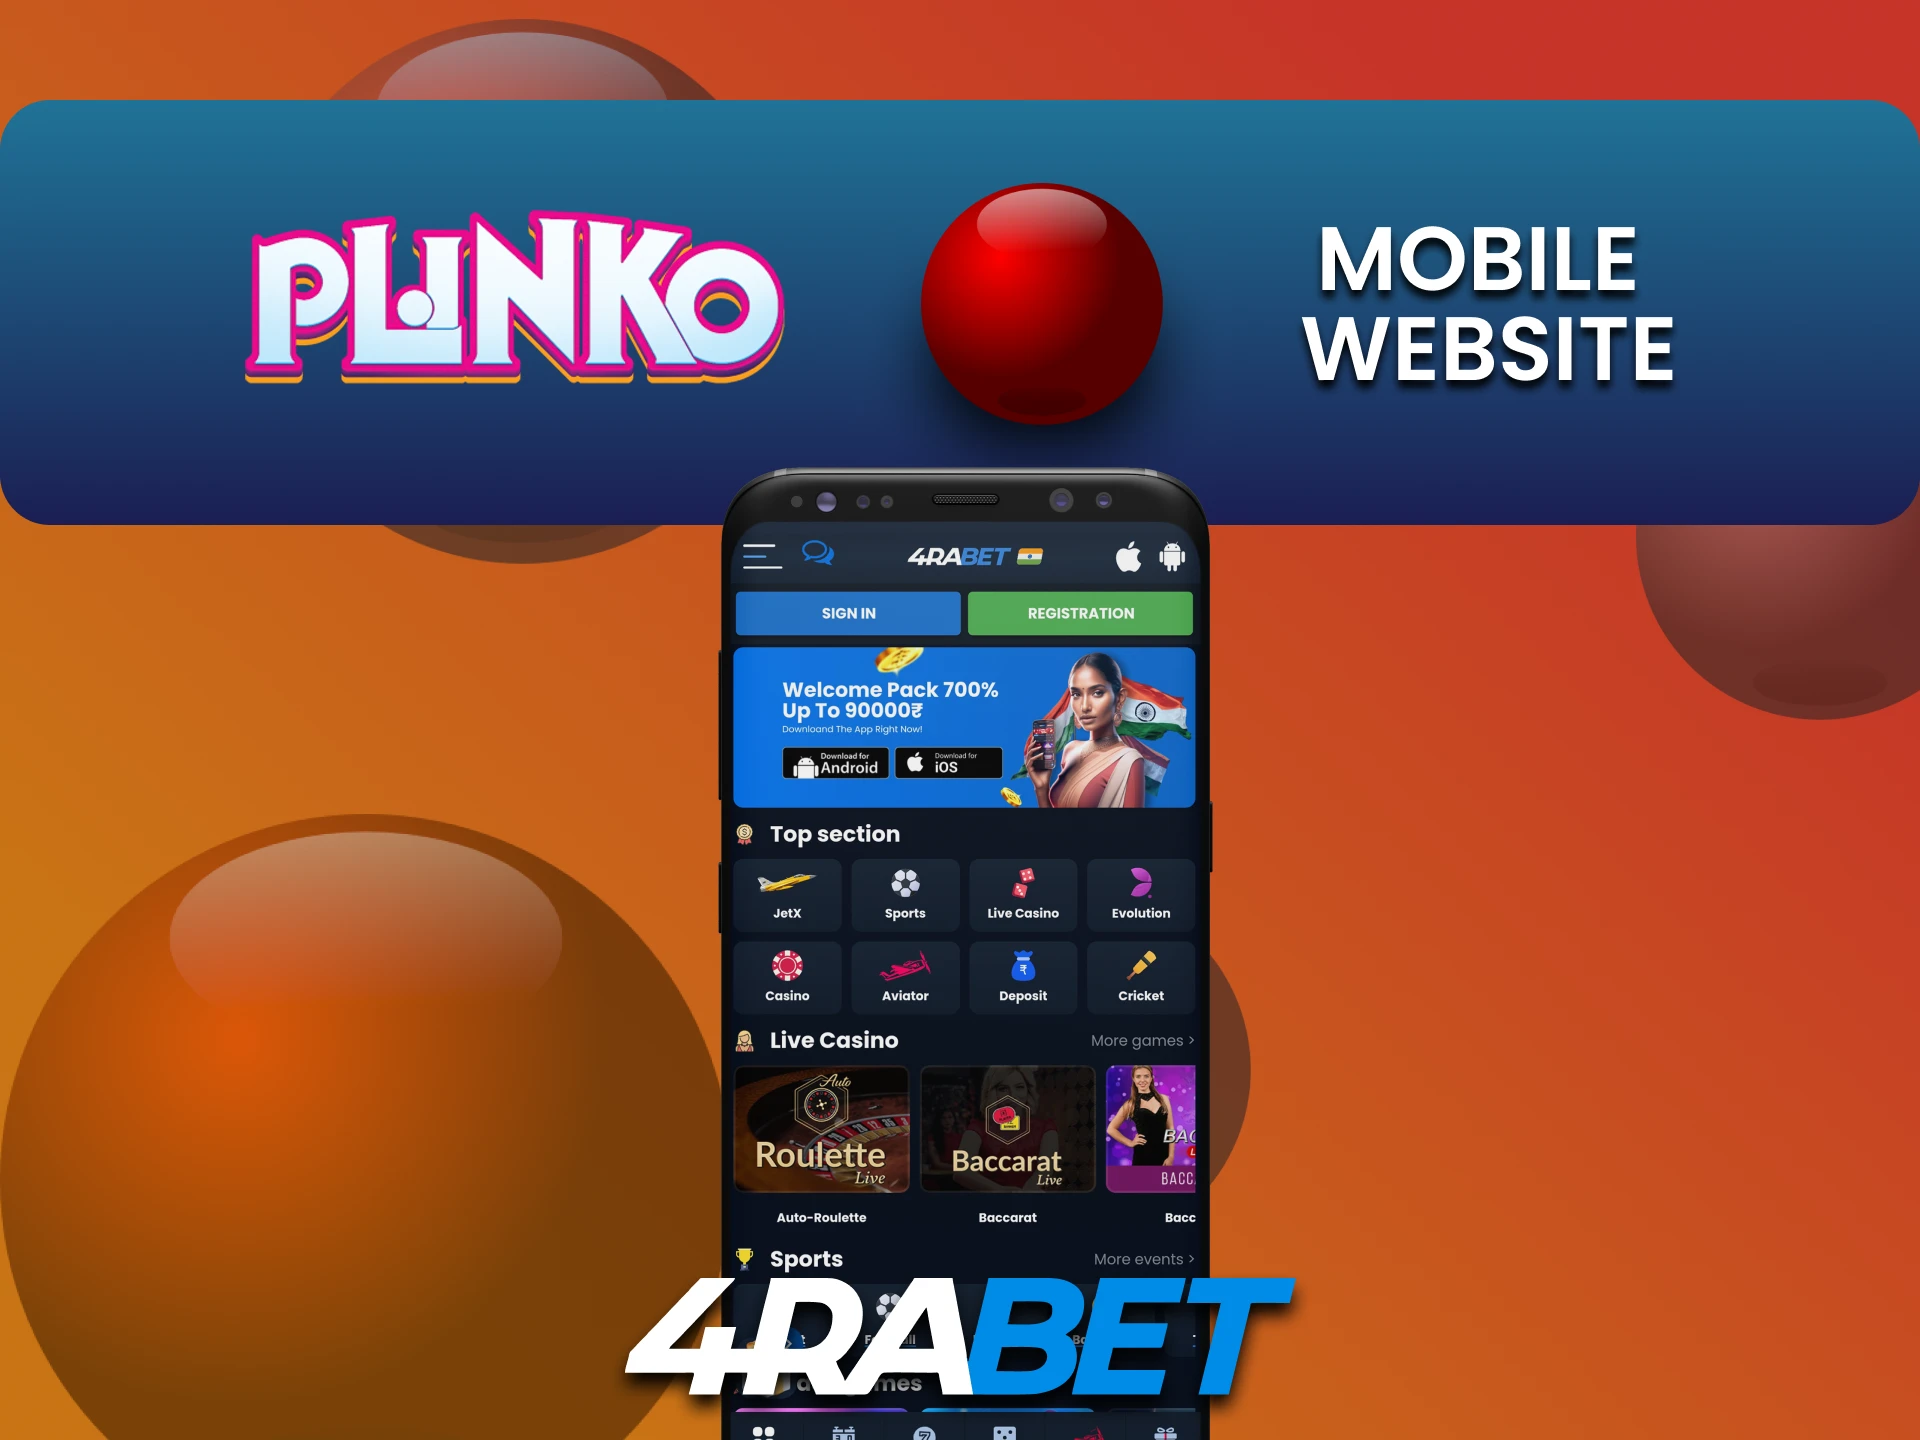 Visit the mobile site for Plinko at 4rabet.